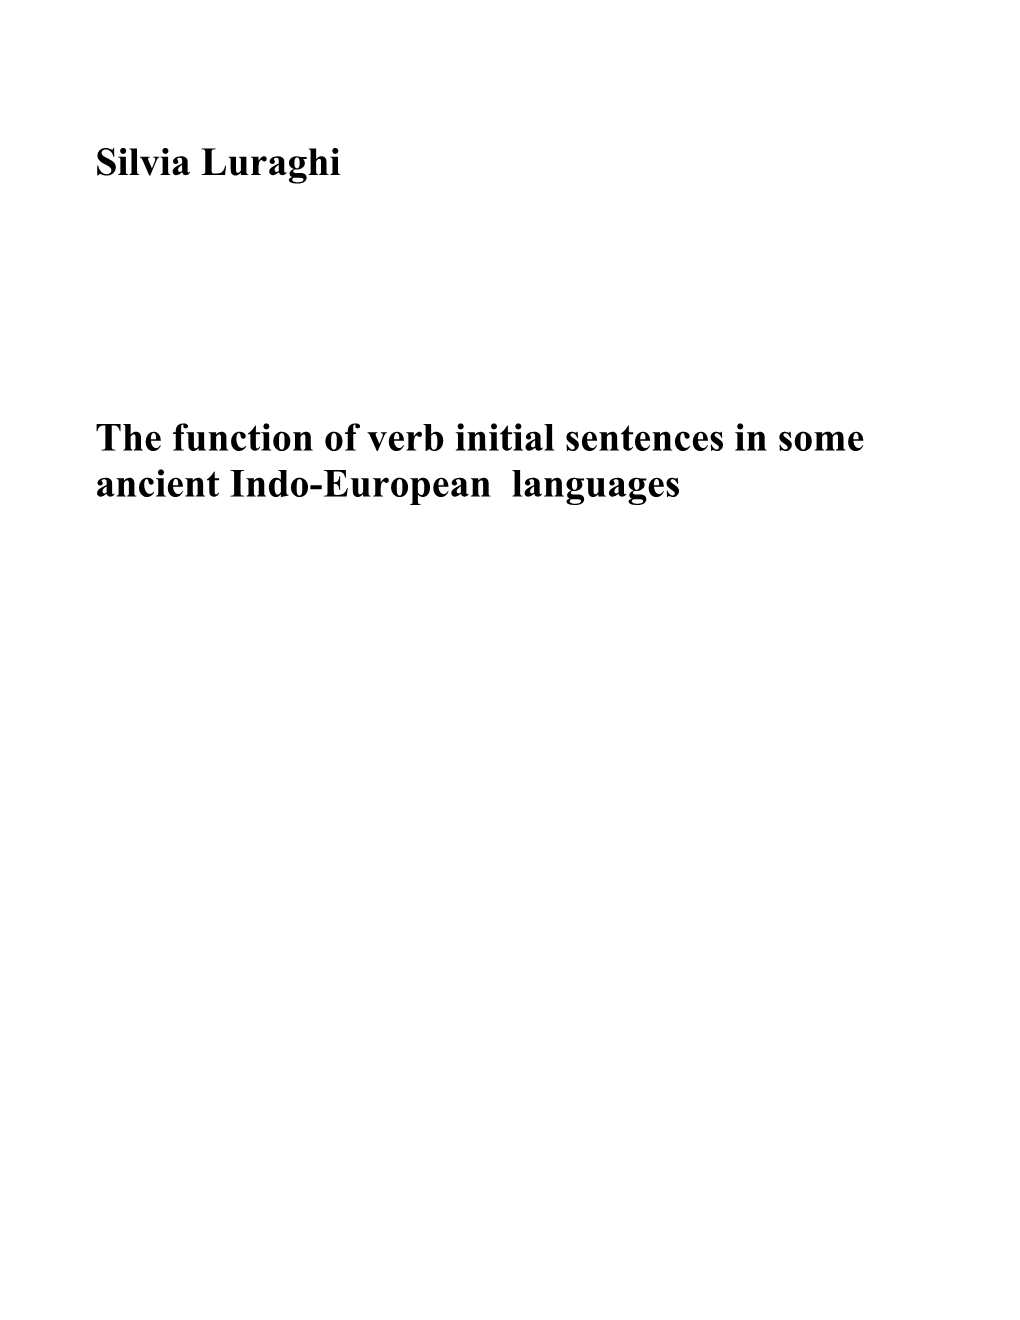 The Function of Verb Initial Sentences in Some Ancient Indo-European Languages